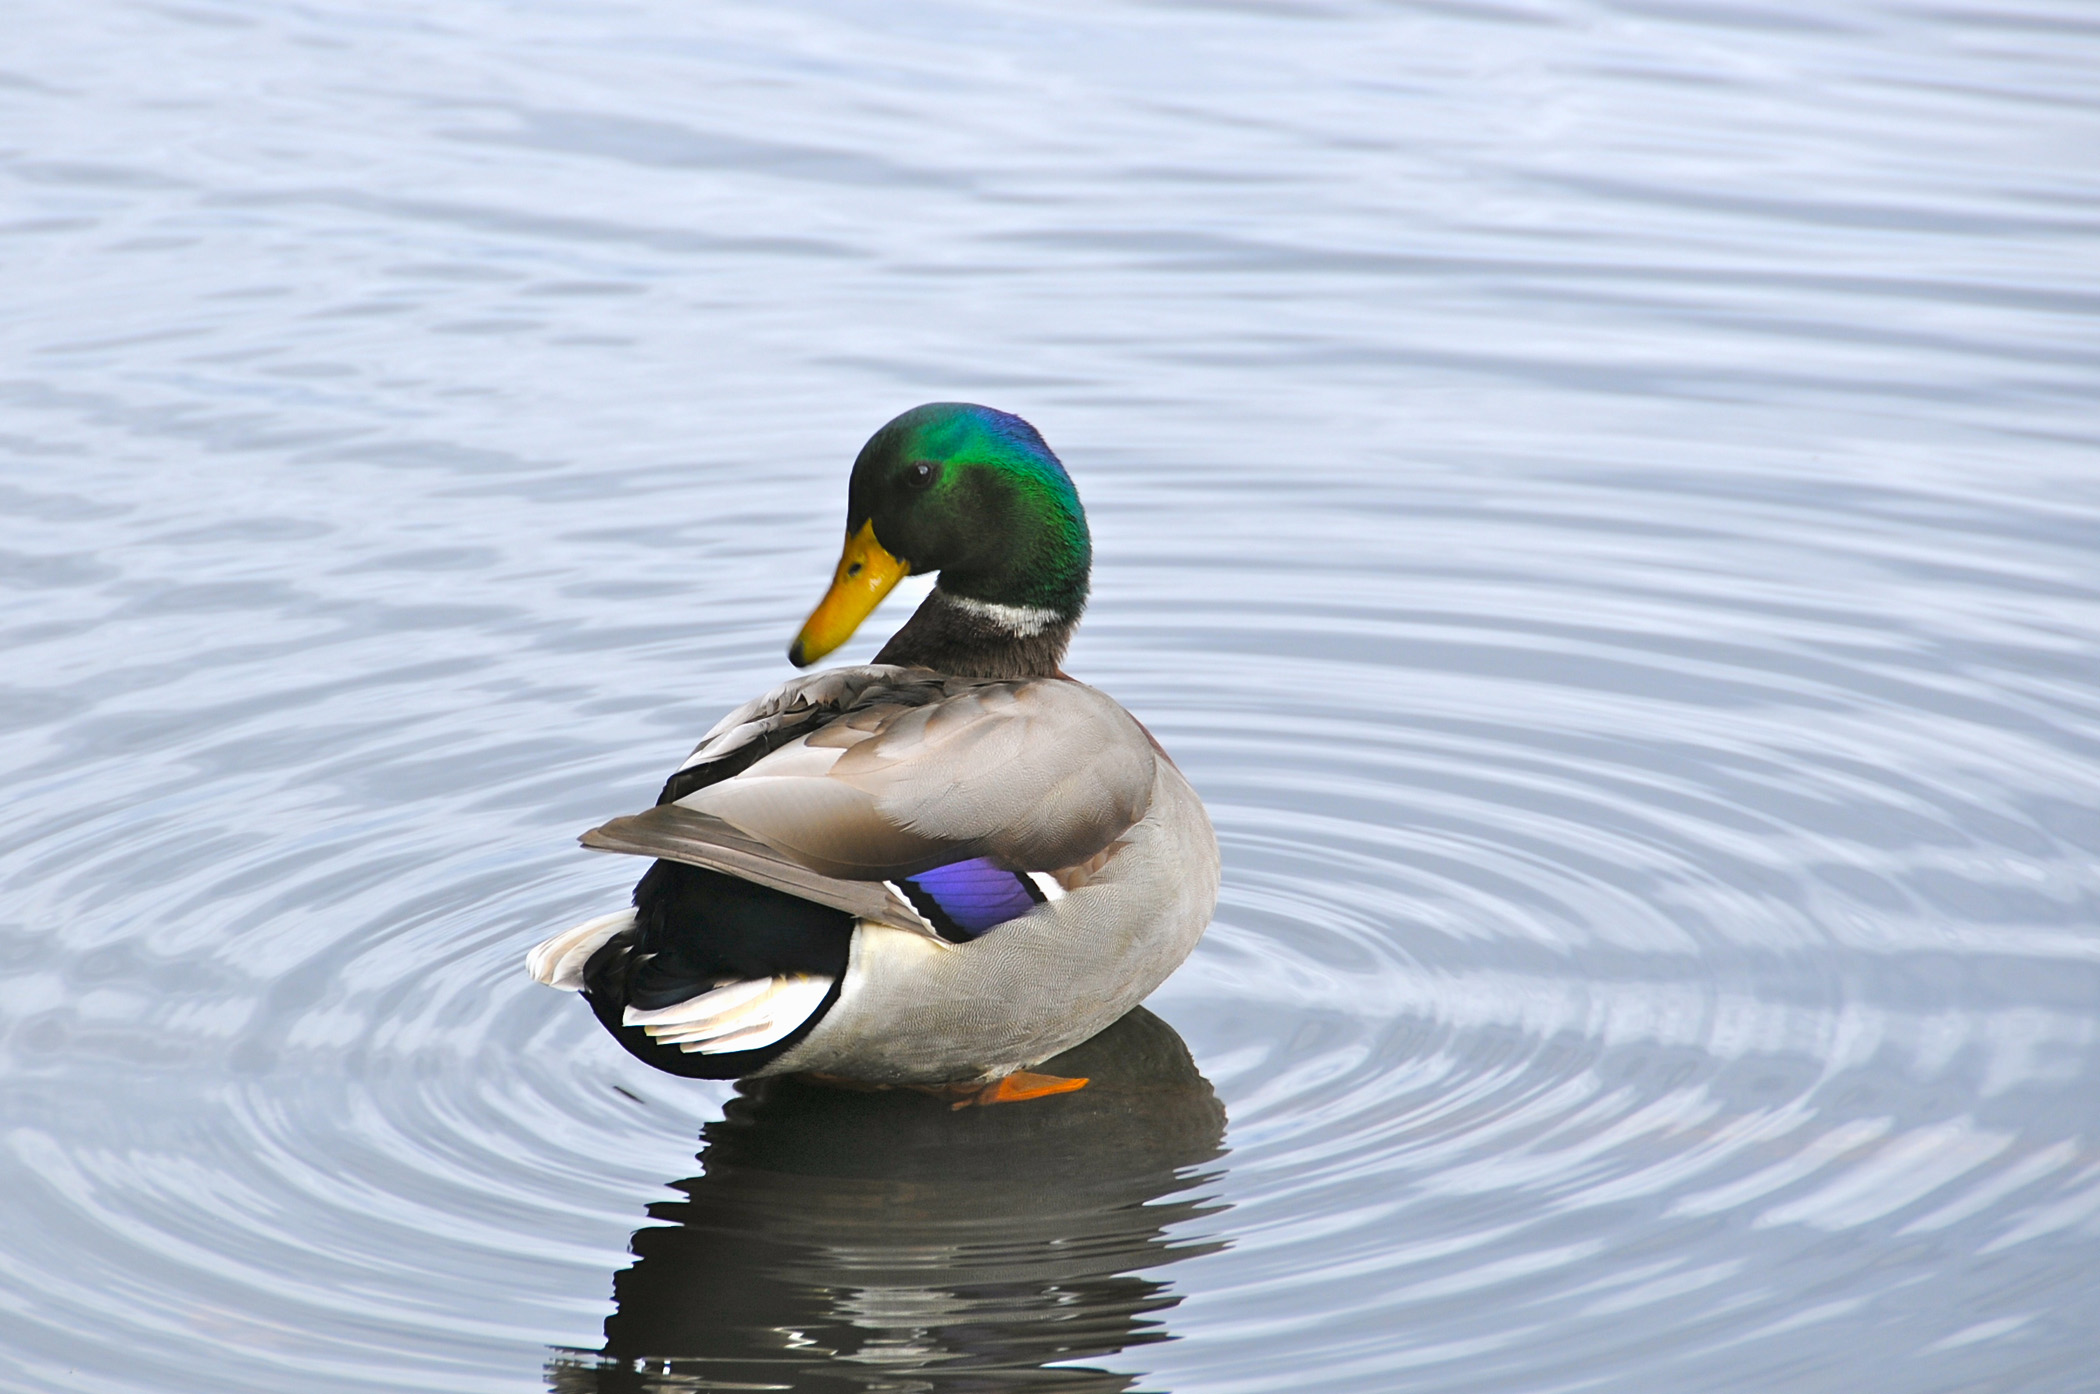 Duck Preening Its Feathers And Making Ripples (user submitted)